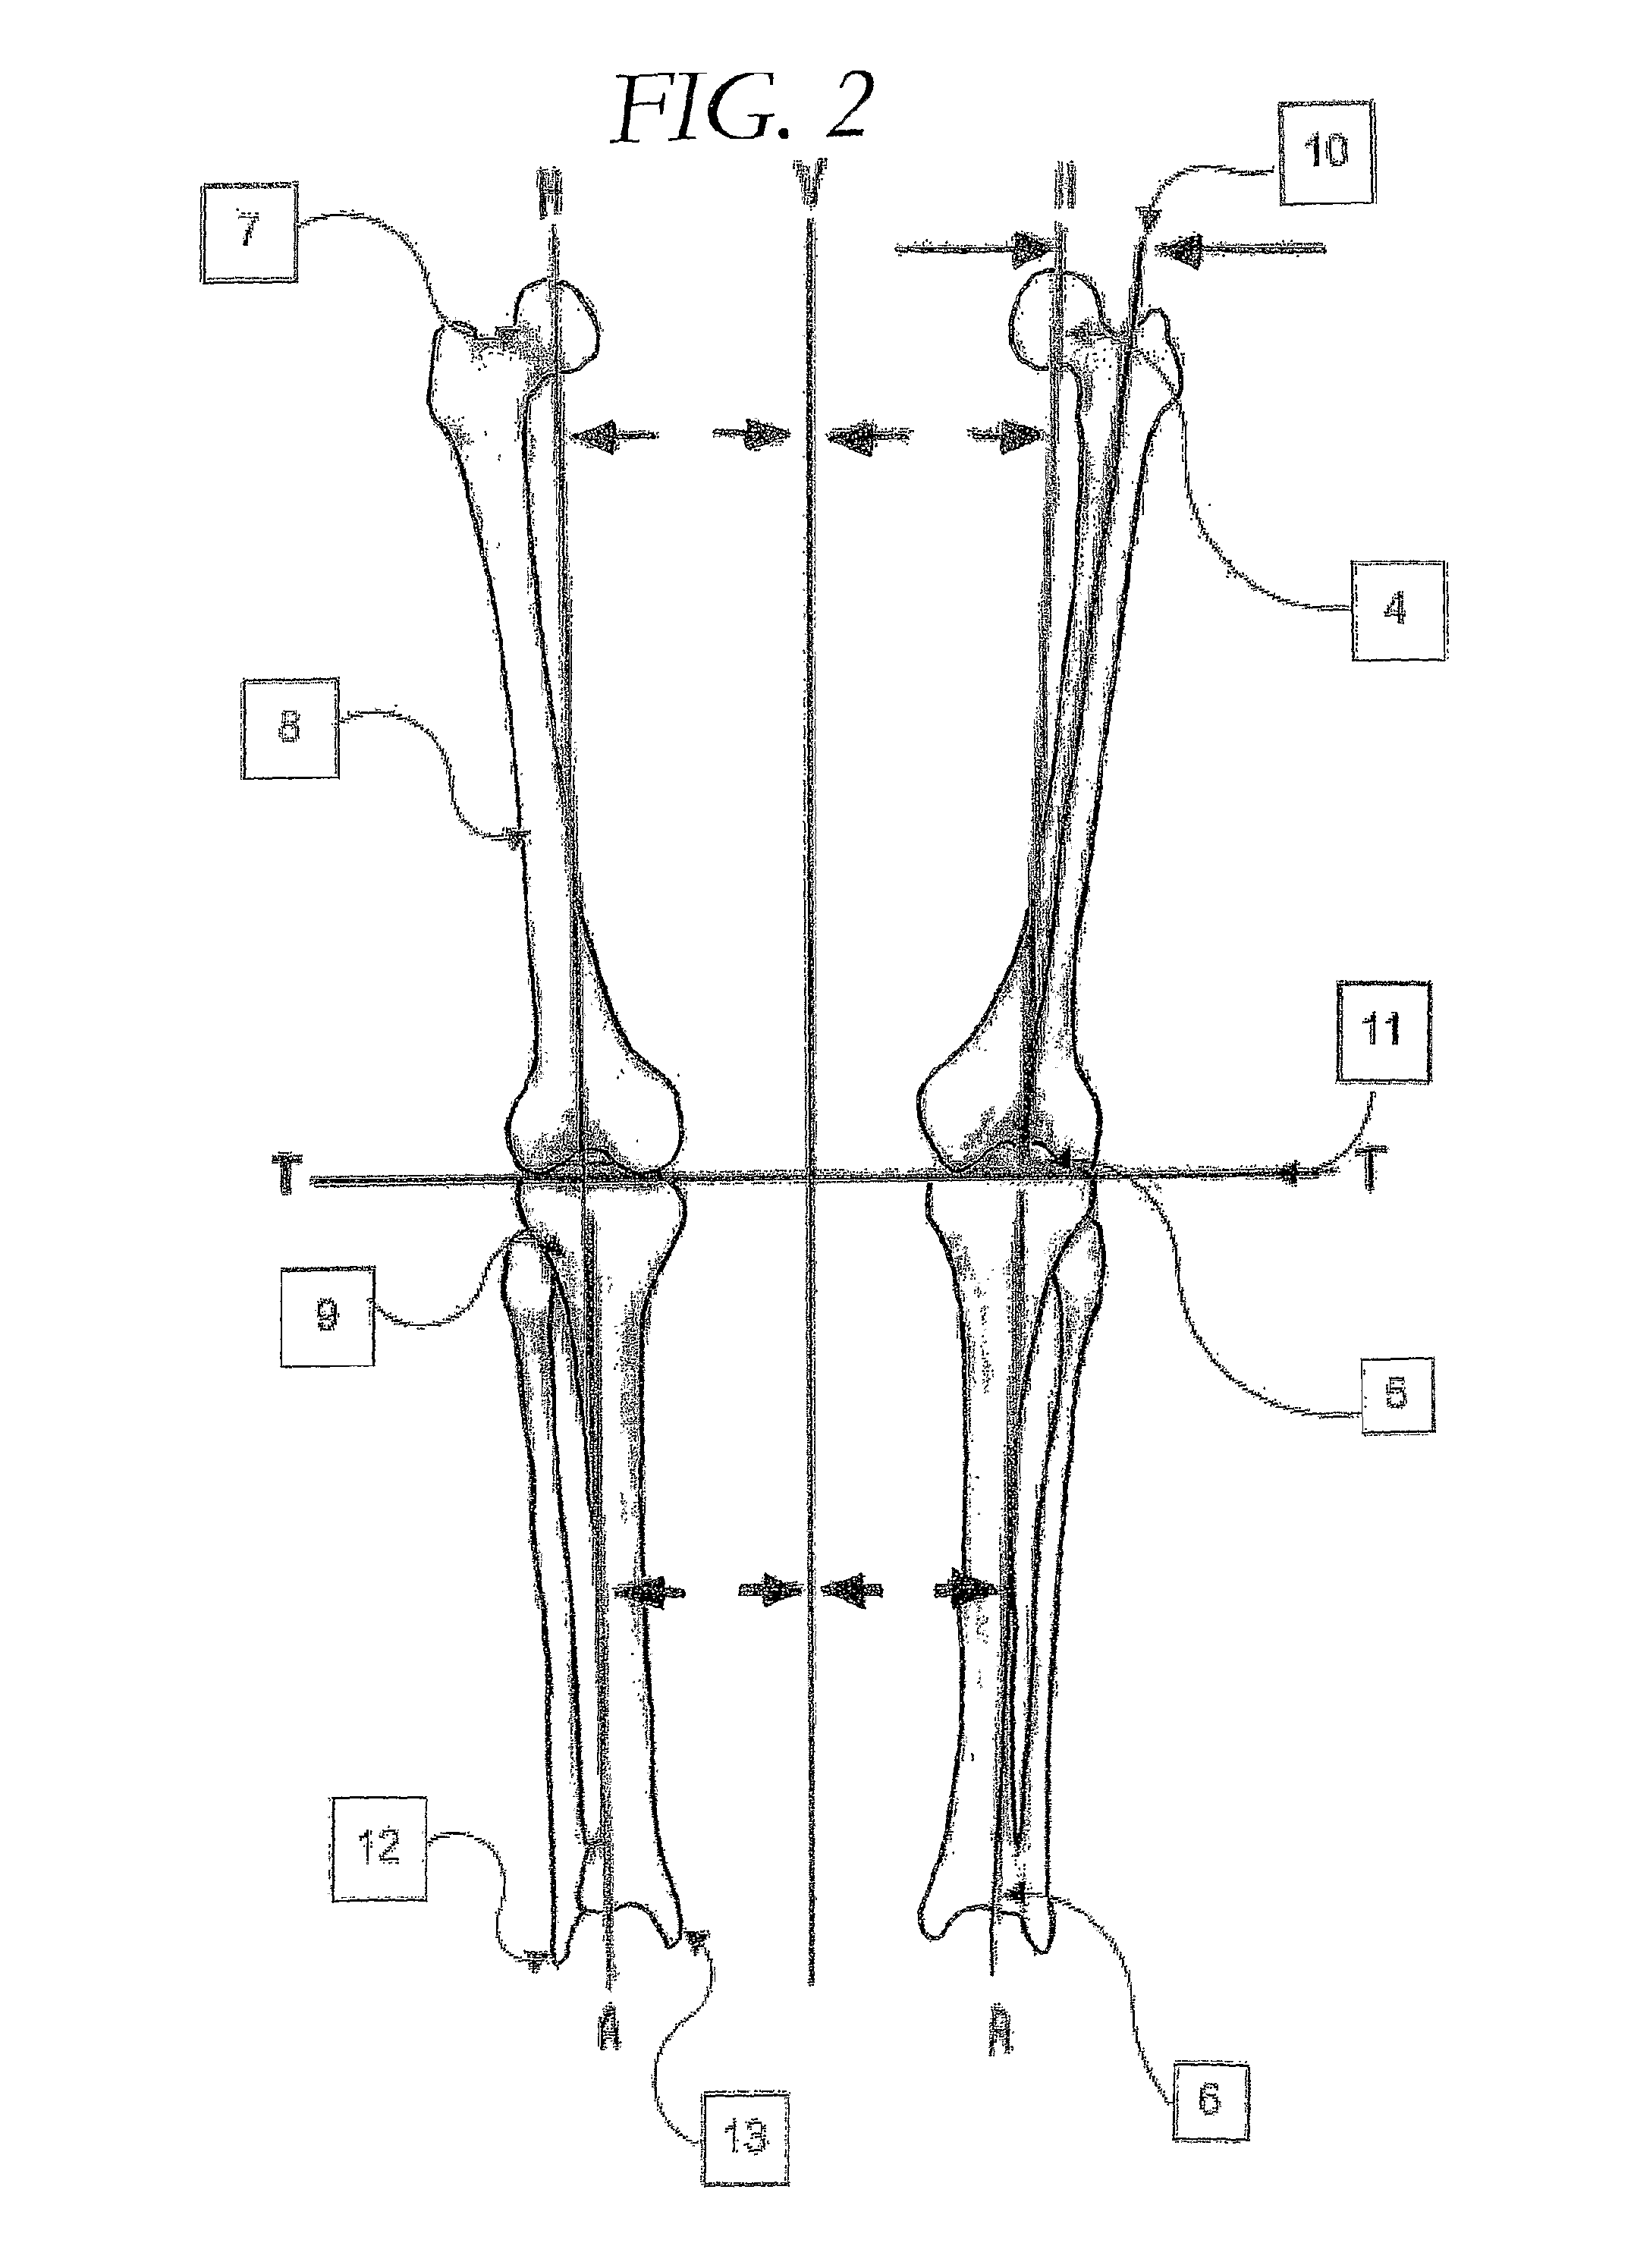 Device and method for assisting the alignment of limbs